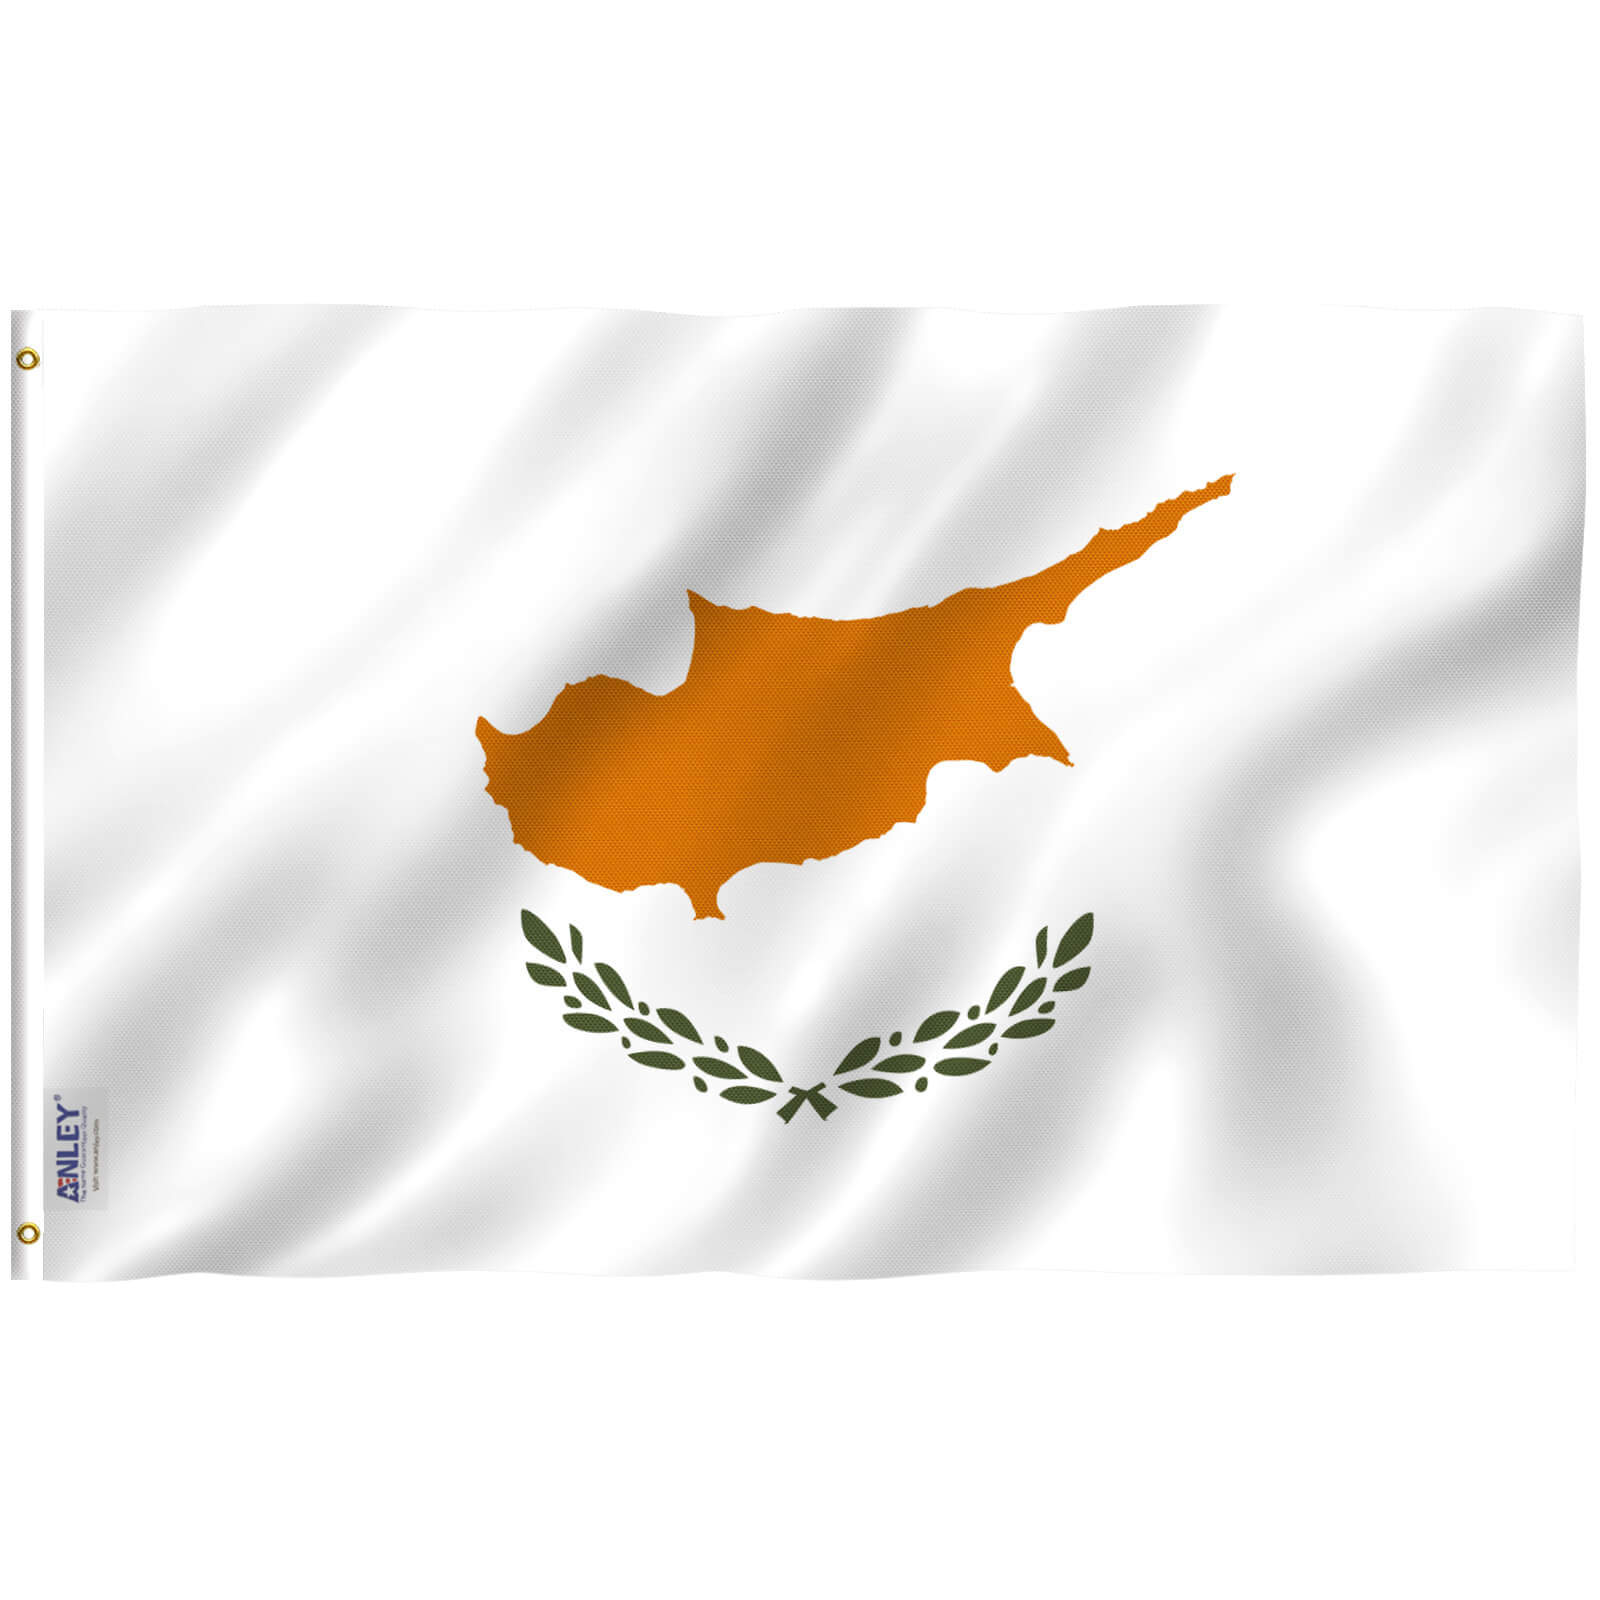 AZ FLAG Cyprus Flag 3' x 5' External Use Banner 3x5 ft Knitted Polyester with Rings Cypriot Flags 90 x 150 cm 